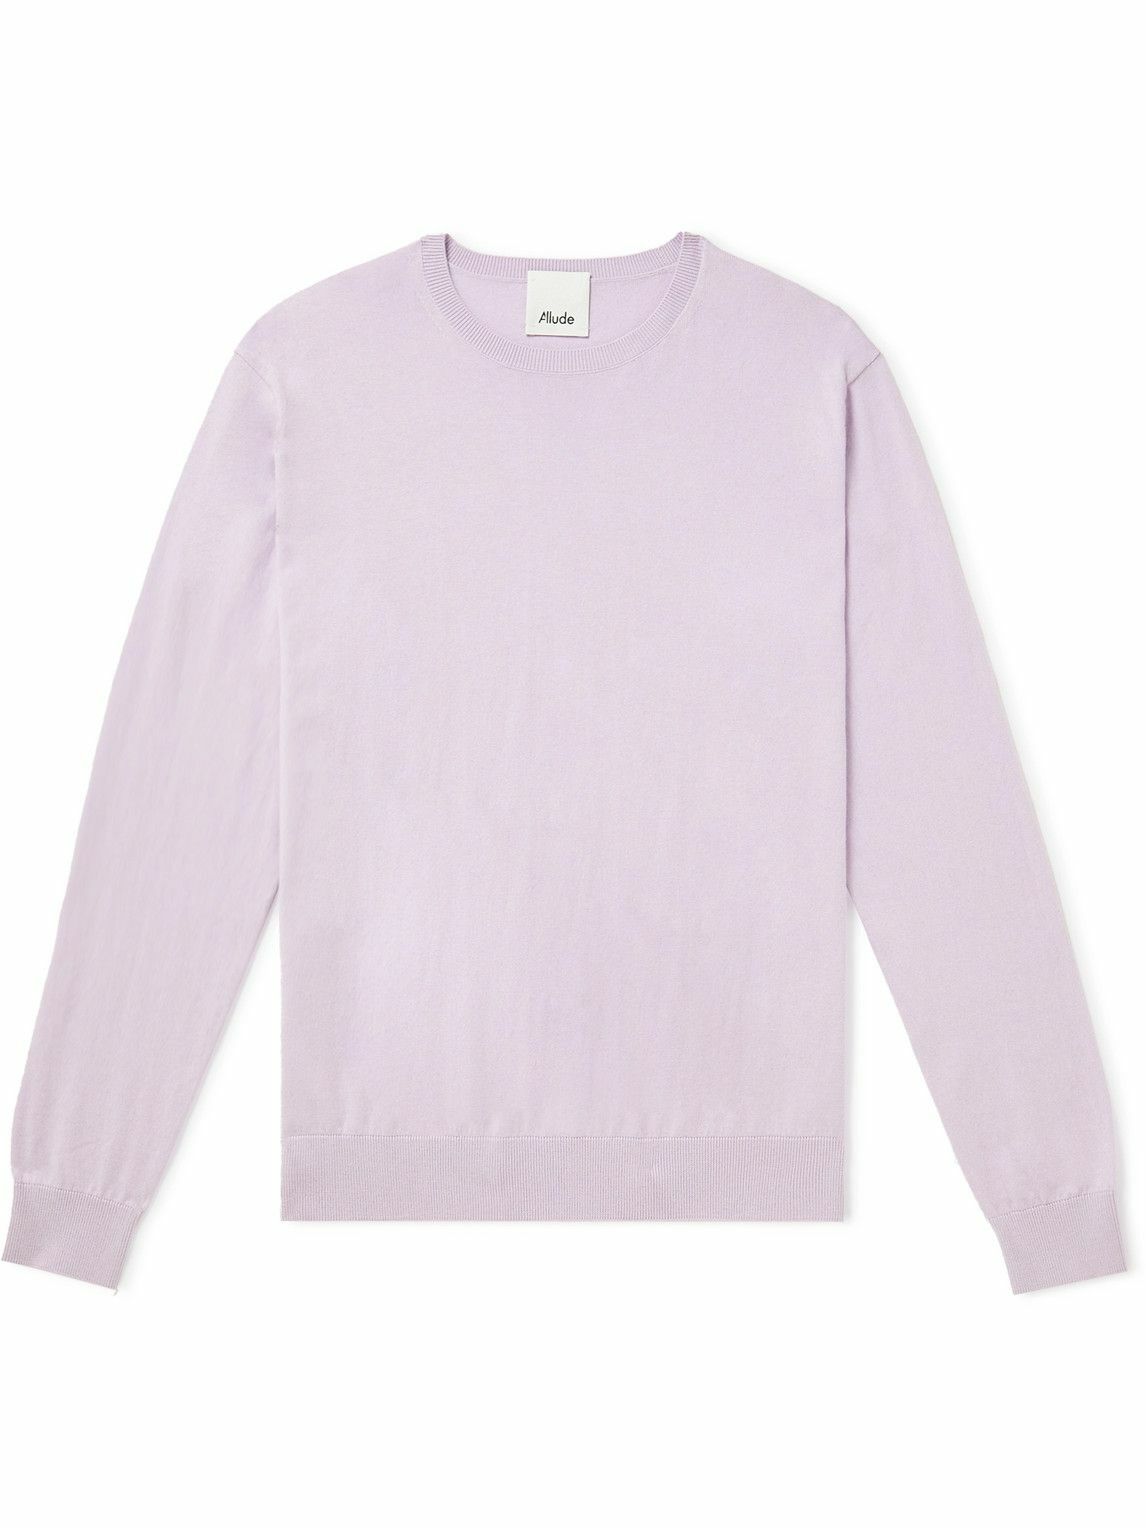 Photo: Allude - Cotton and Cashmere-Blend Sweater - Purple